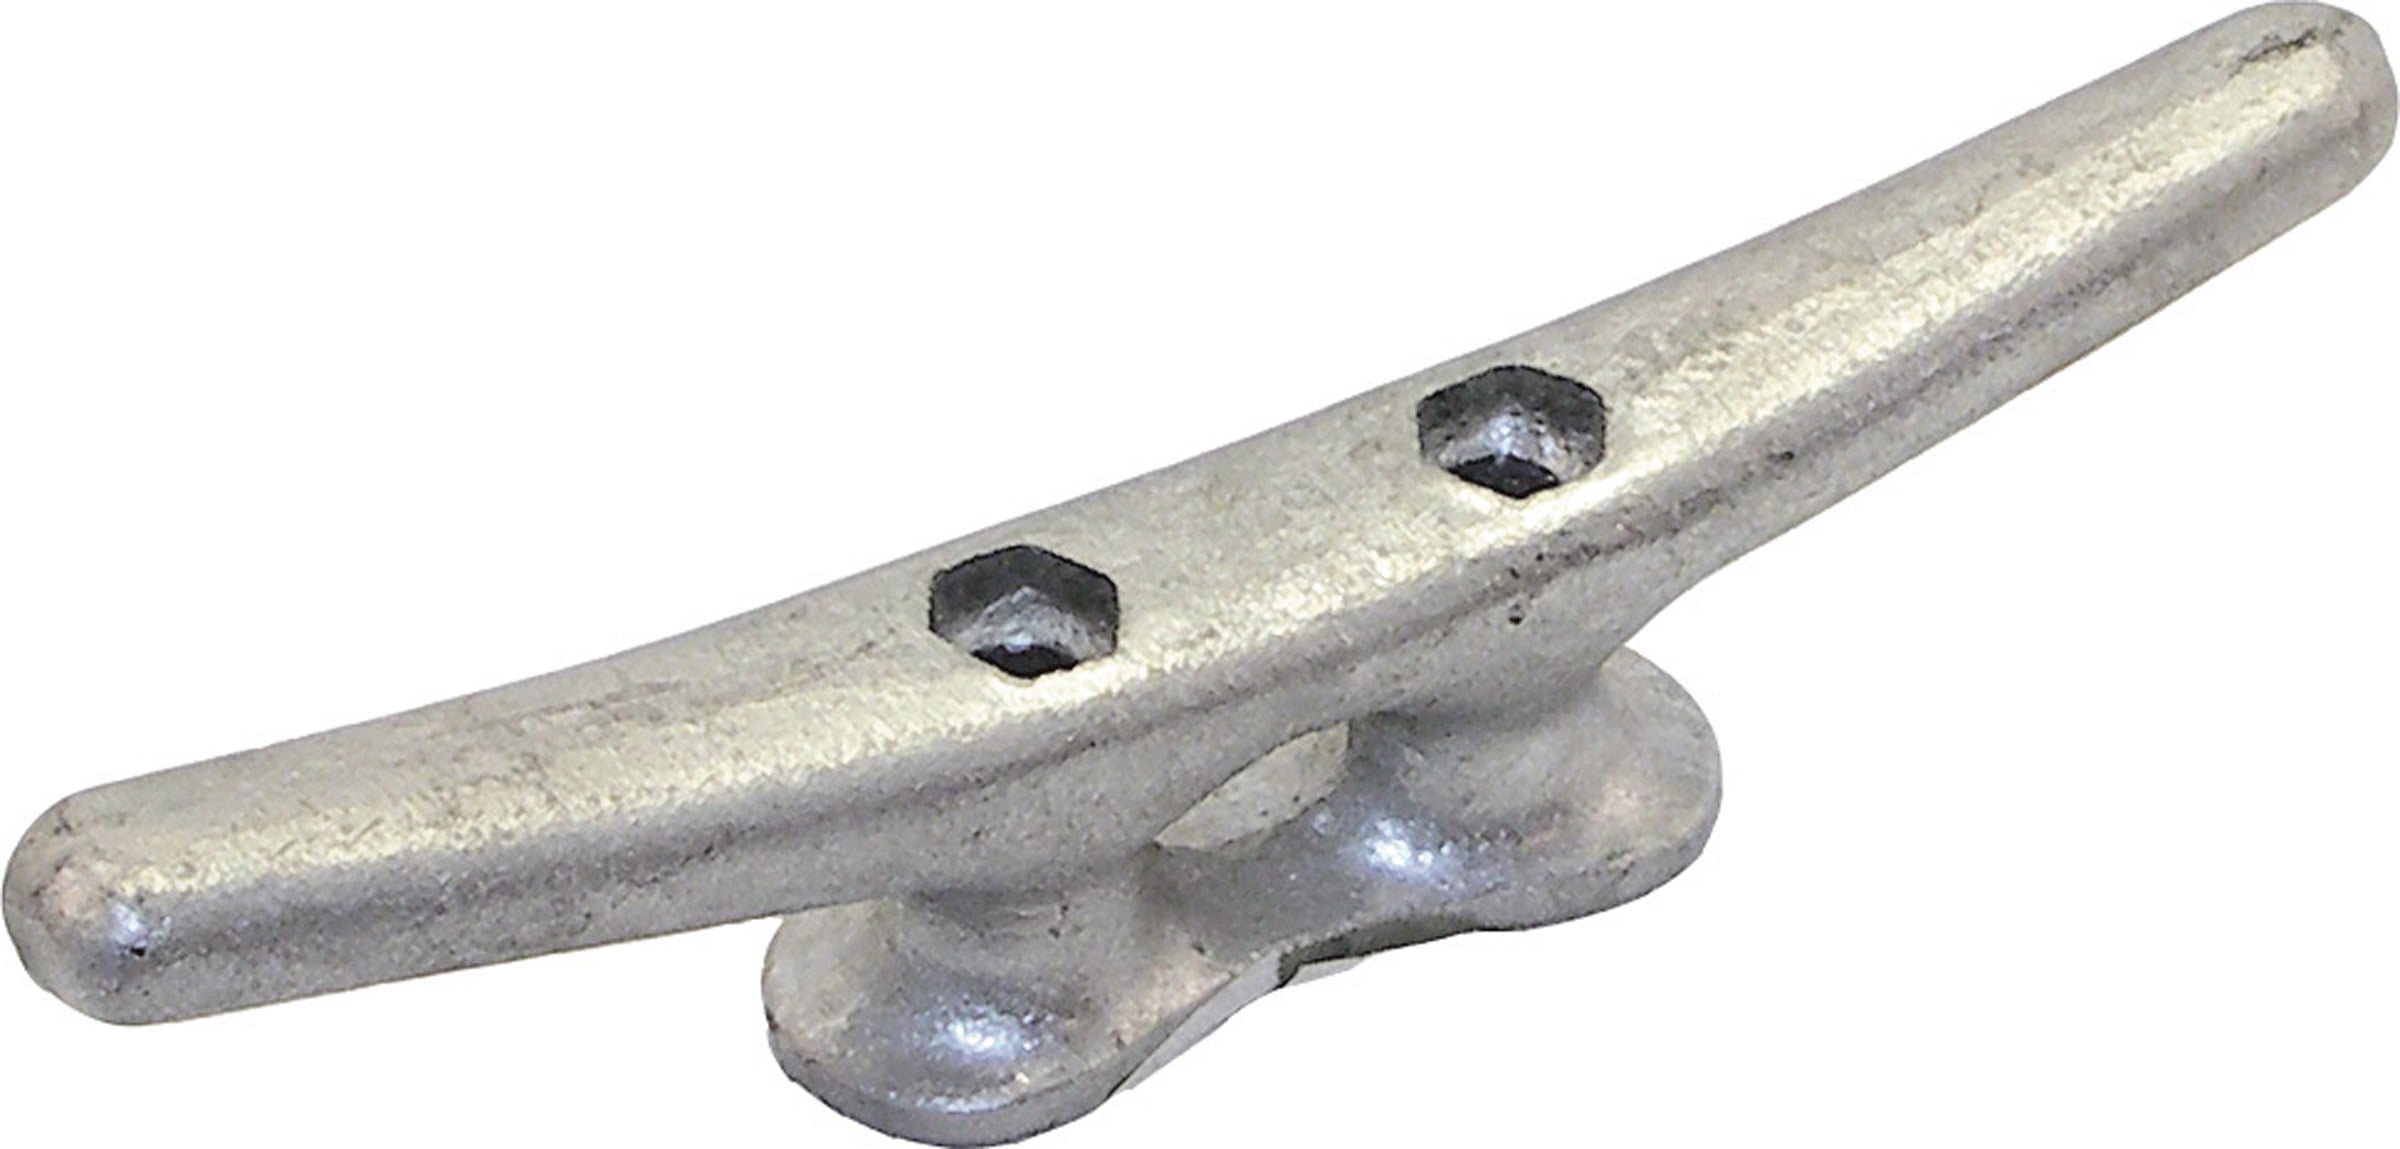 MARINE DOCK CLEAT 5 GALVANIZED OPEN BASE BOAT 50 PACK